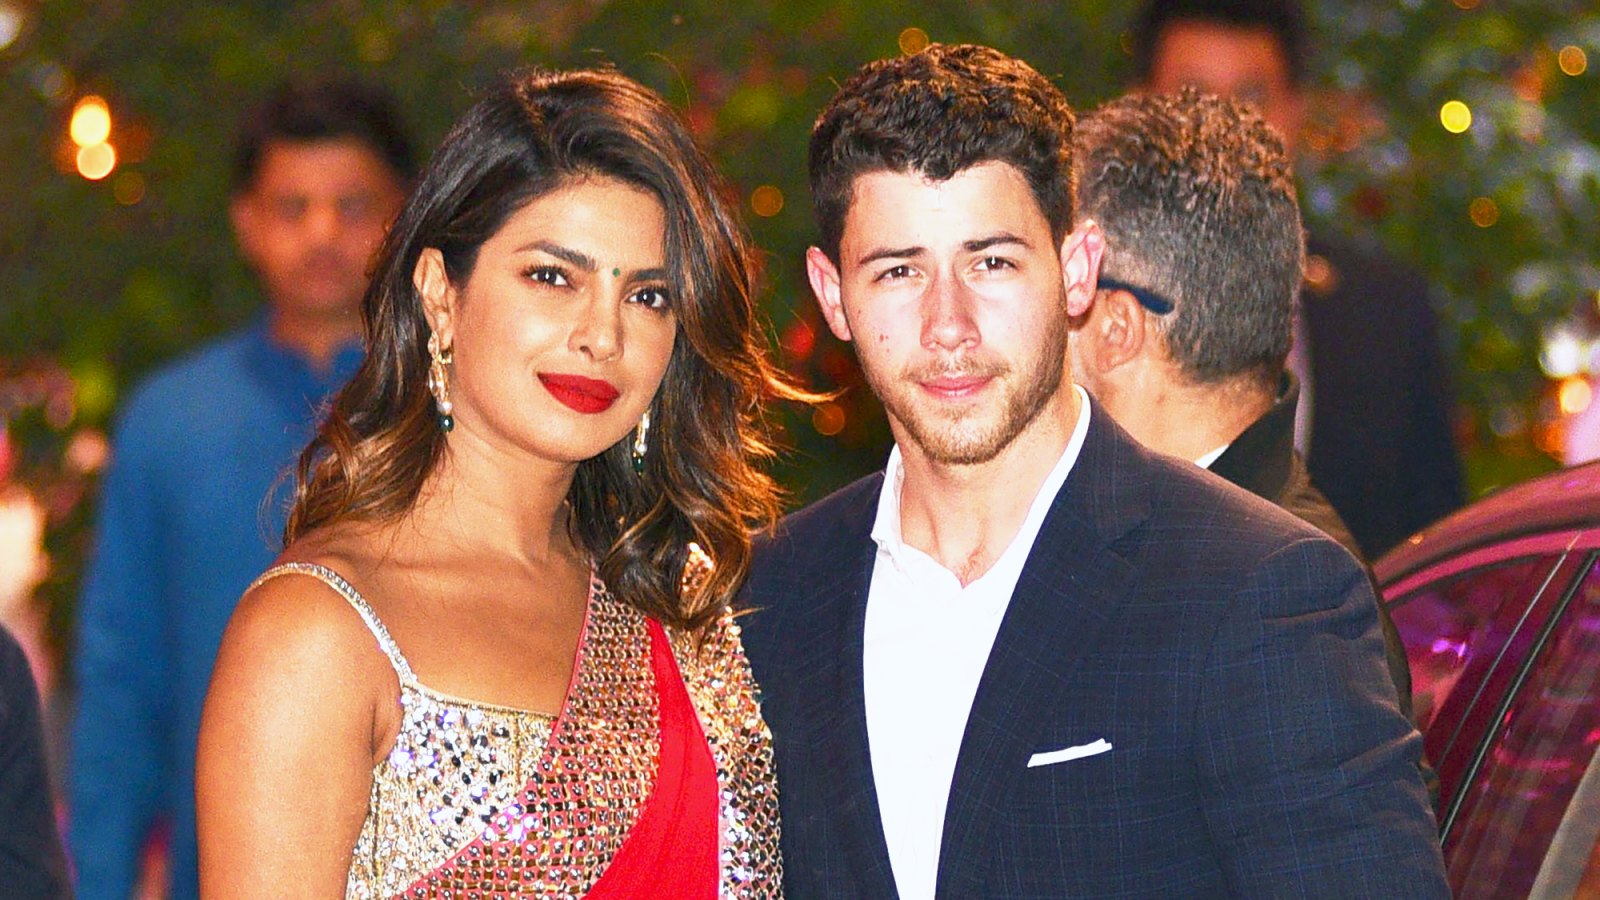 Priyanka Chopra and Nick Jonas arrive for the pre-engagement party in India on June 28, 2018.